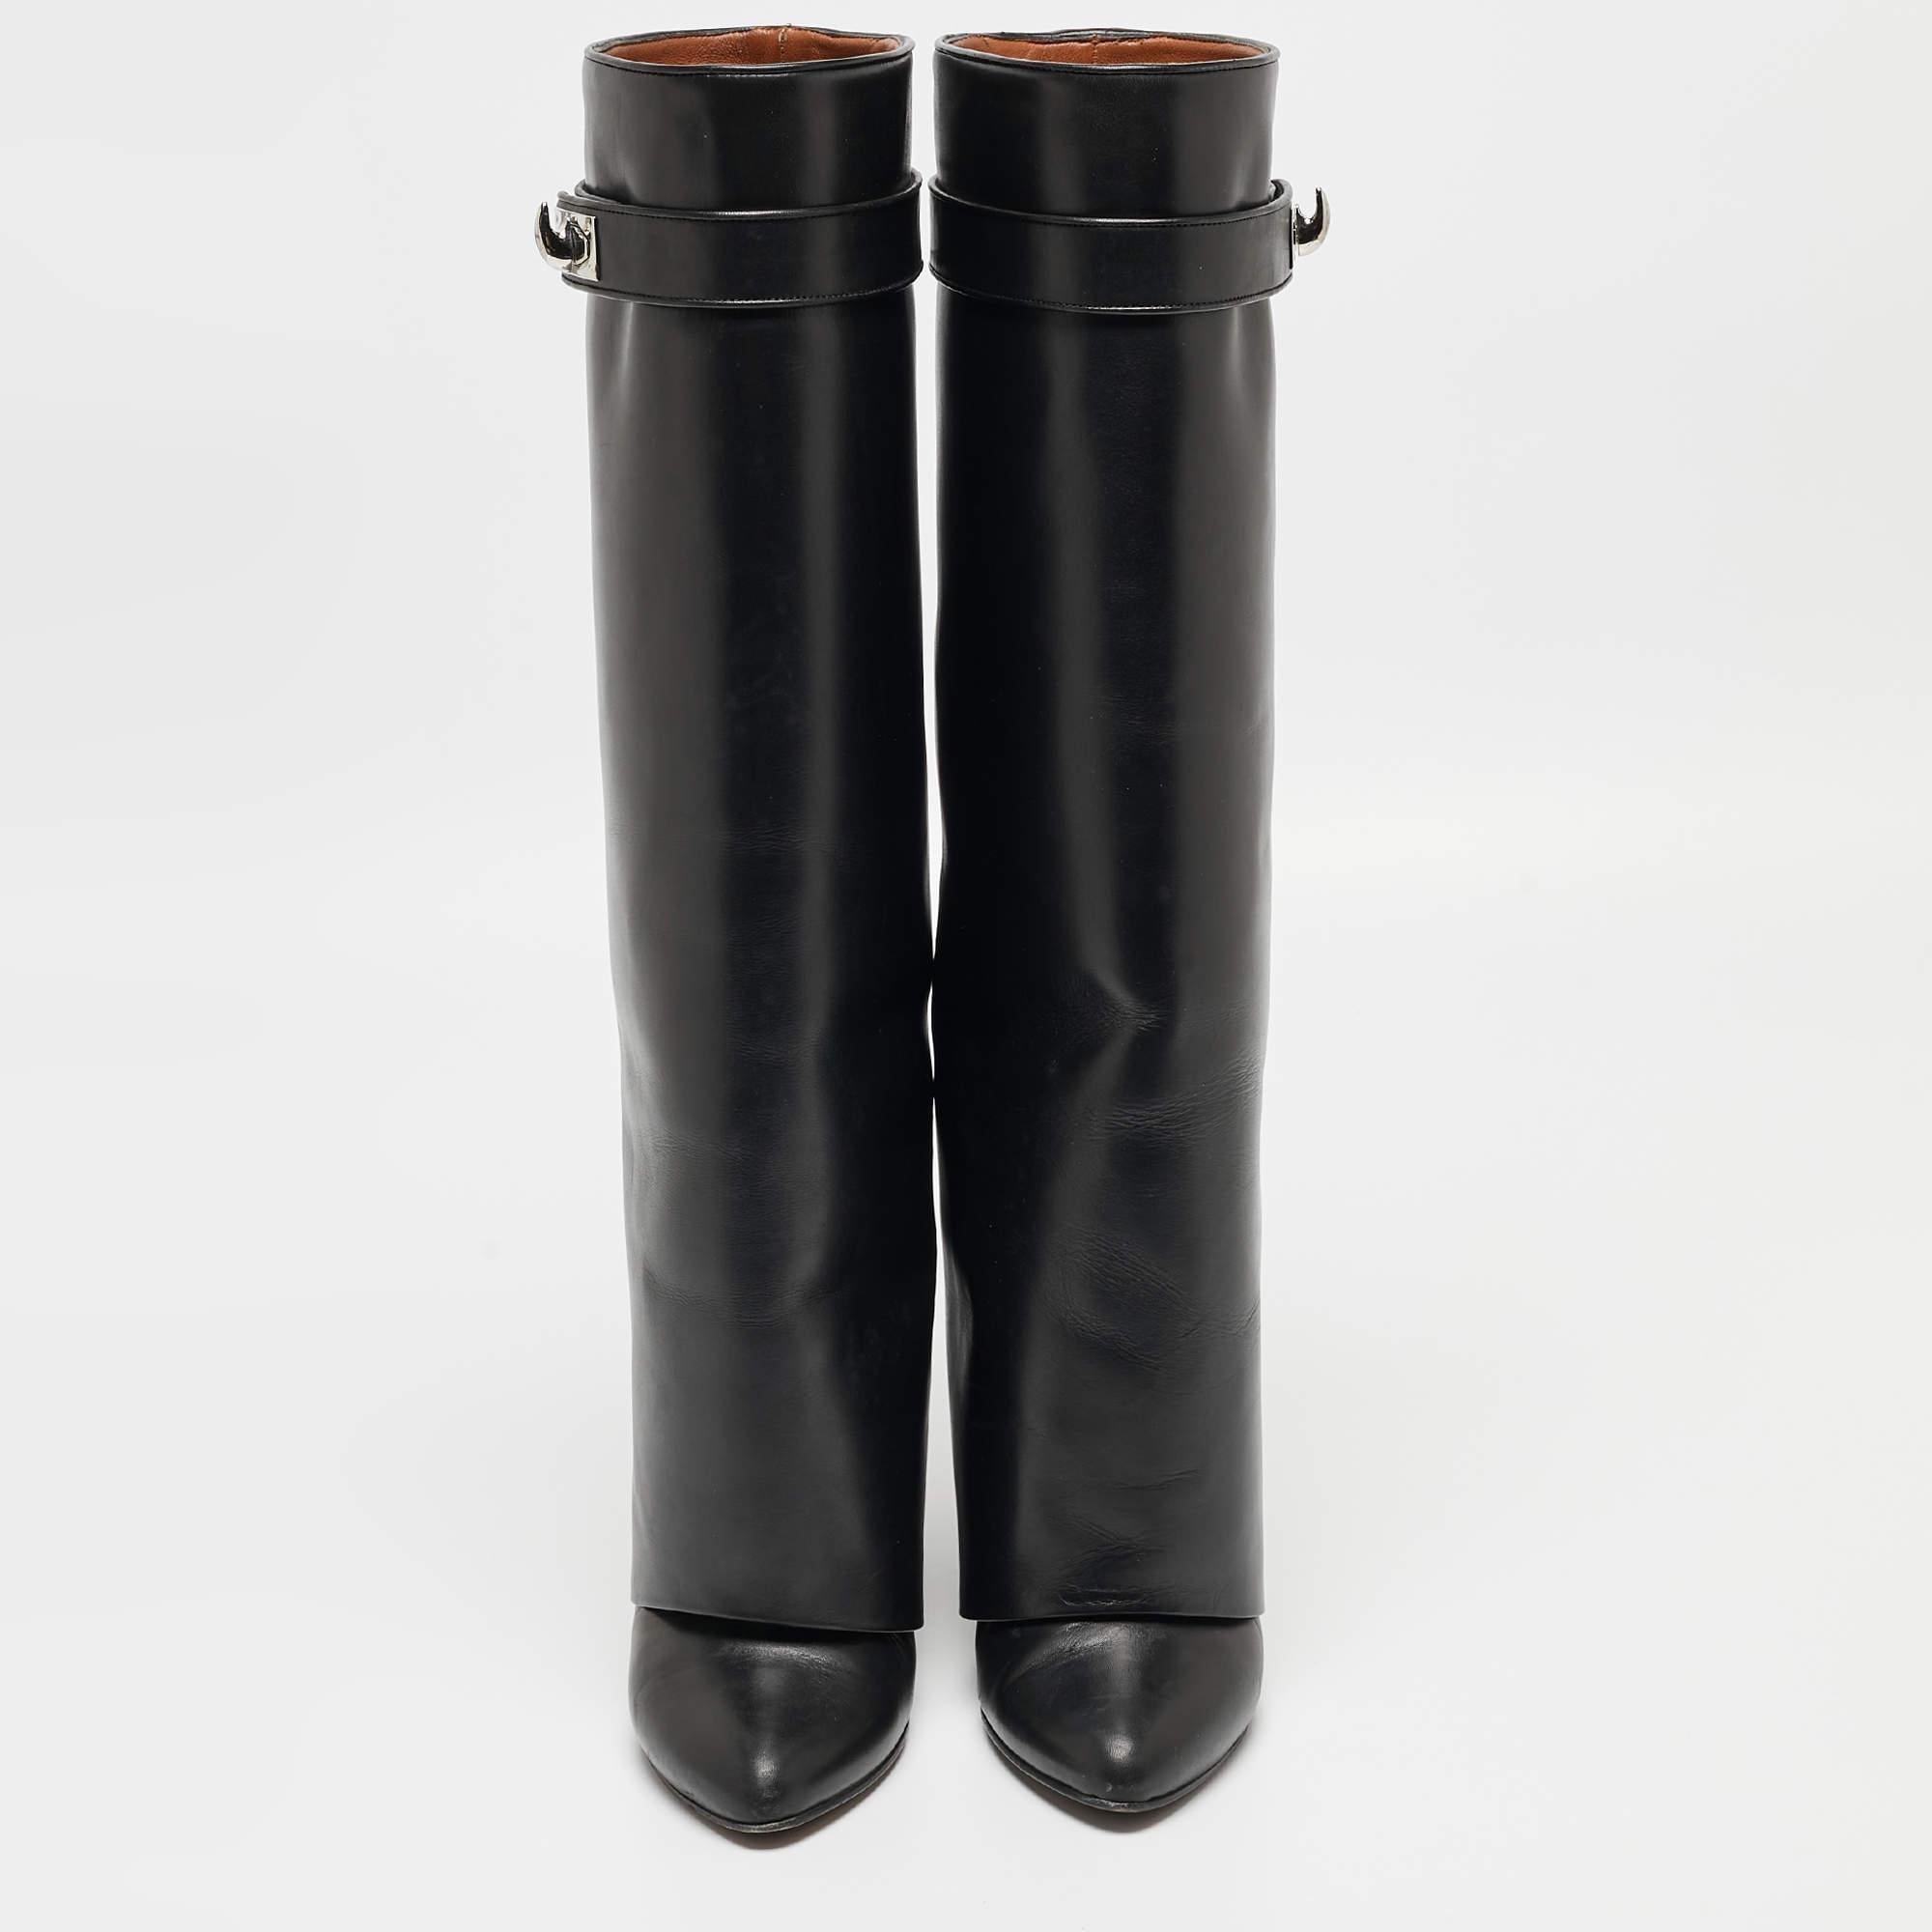 Crafted in a classy black, we love these Givenchy boots. Designed to make a statement, they have a sleek silhouette and a nice fit. Wear yours under maxi skirts for a peek of glamour, or let them shine with cropped hemlines.

Includes: Original Box

